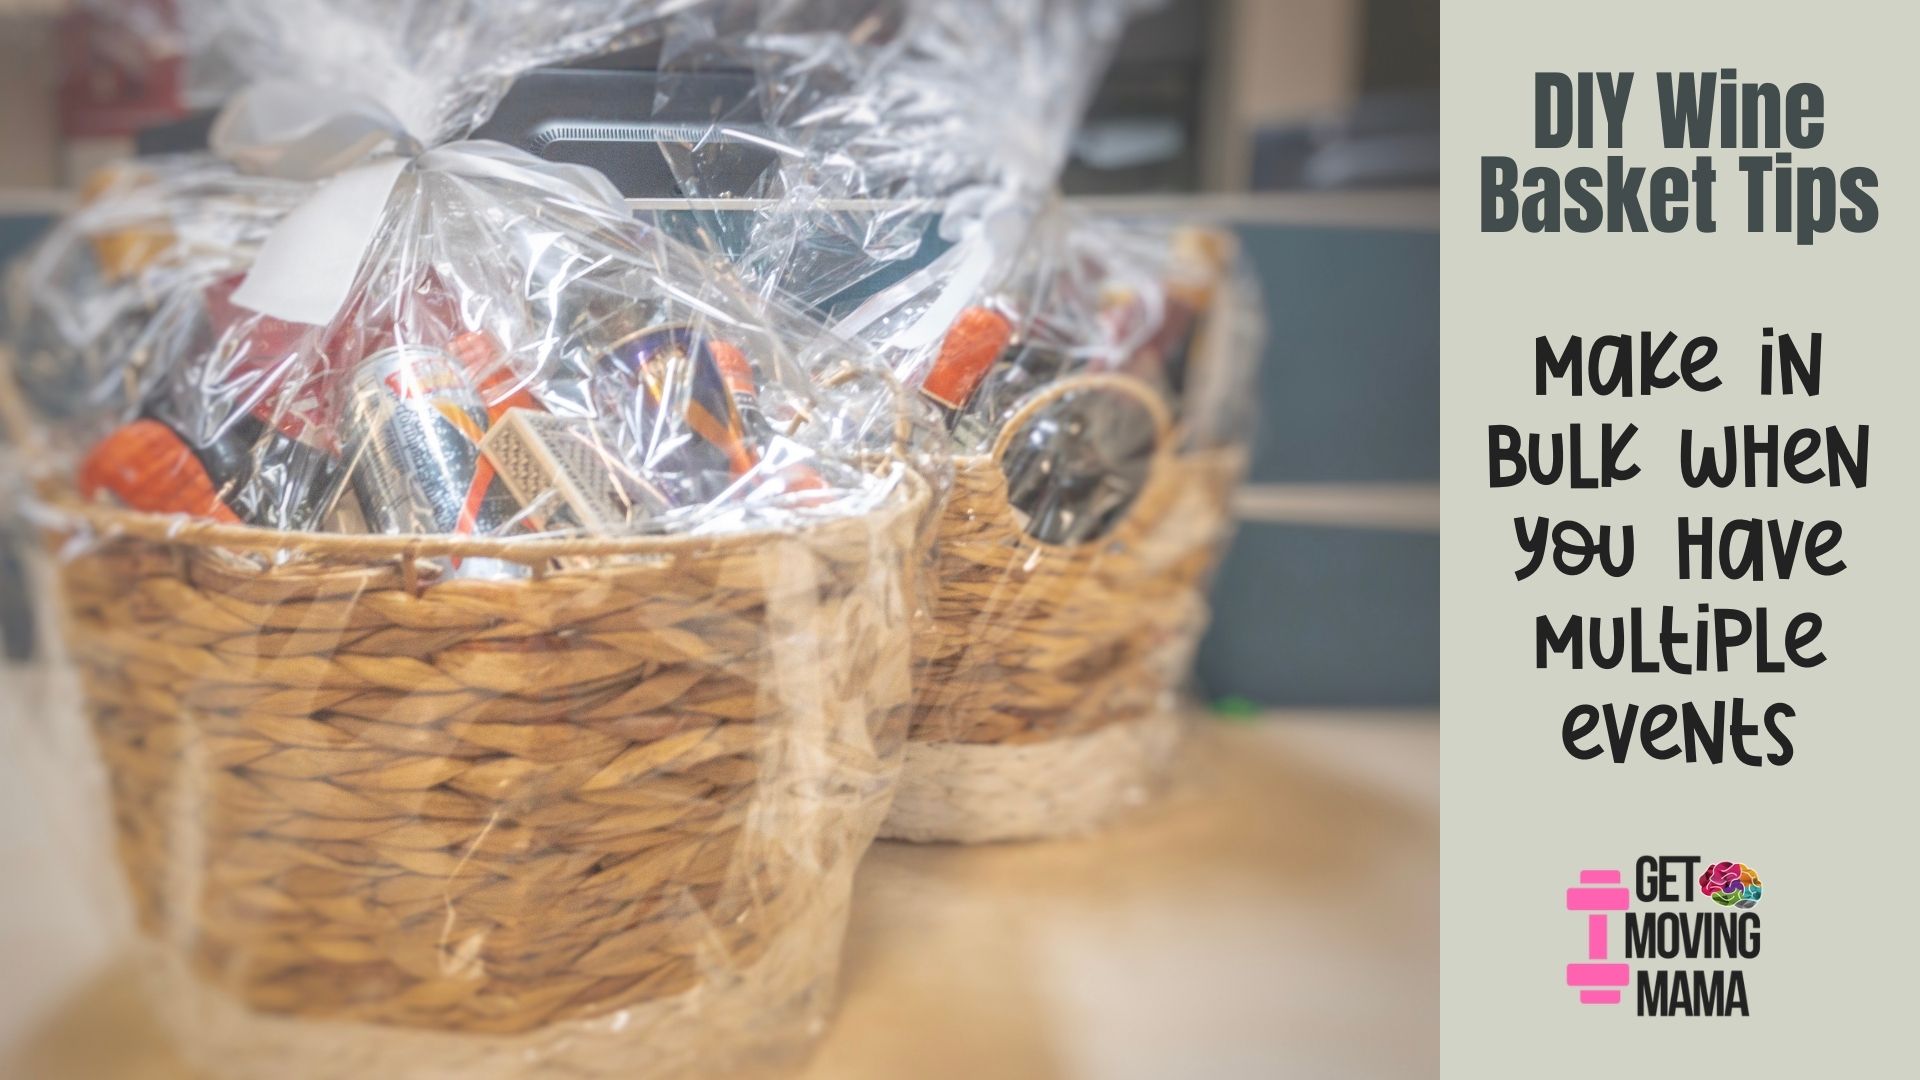 A picture of two wine baskets and a tip to make wine baskets in bulk when you have multiple events to attend.